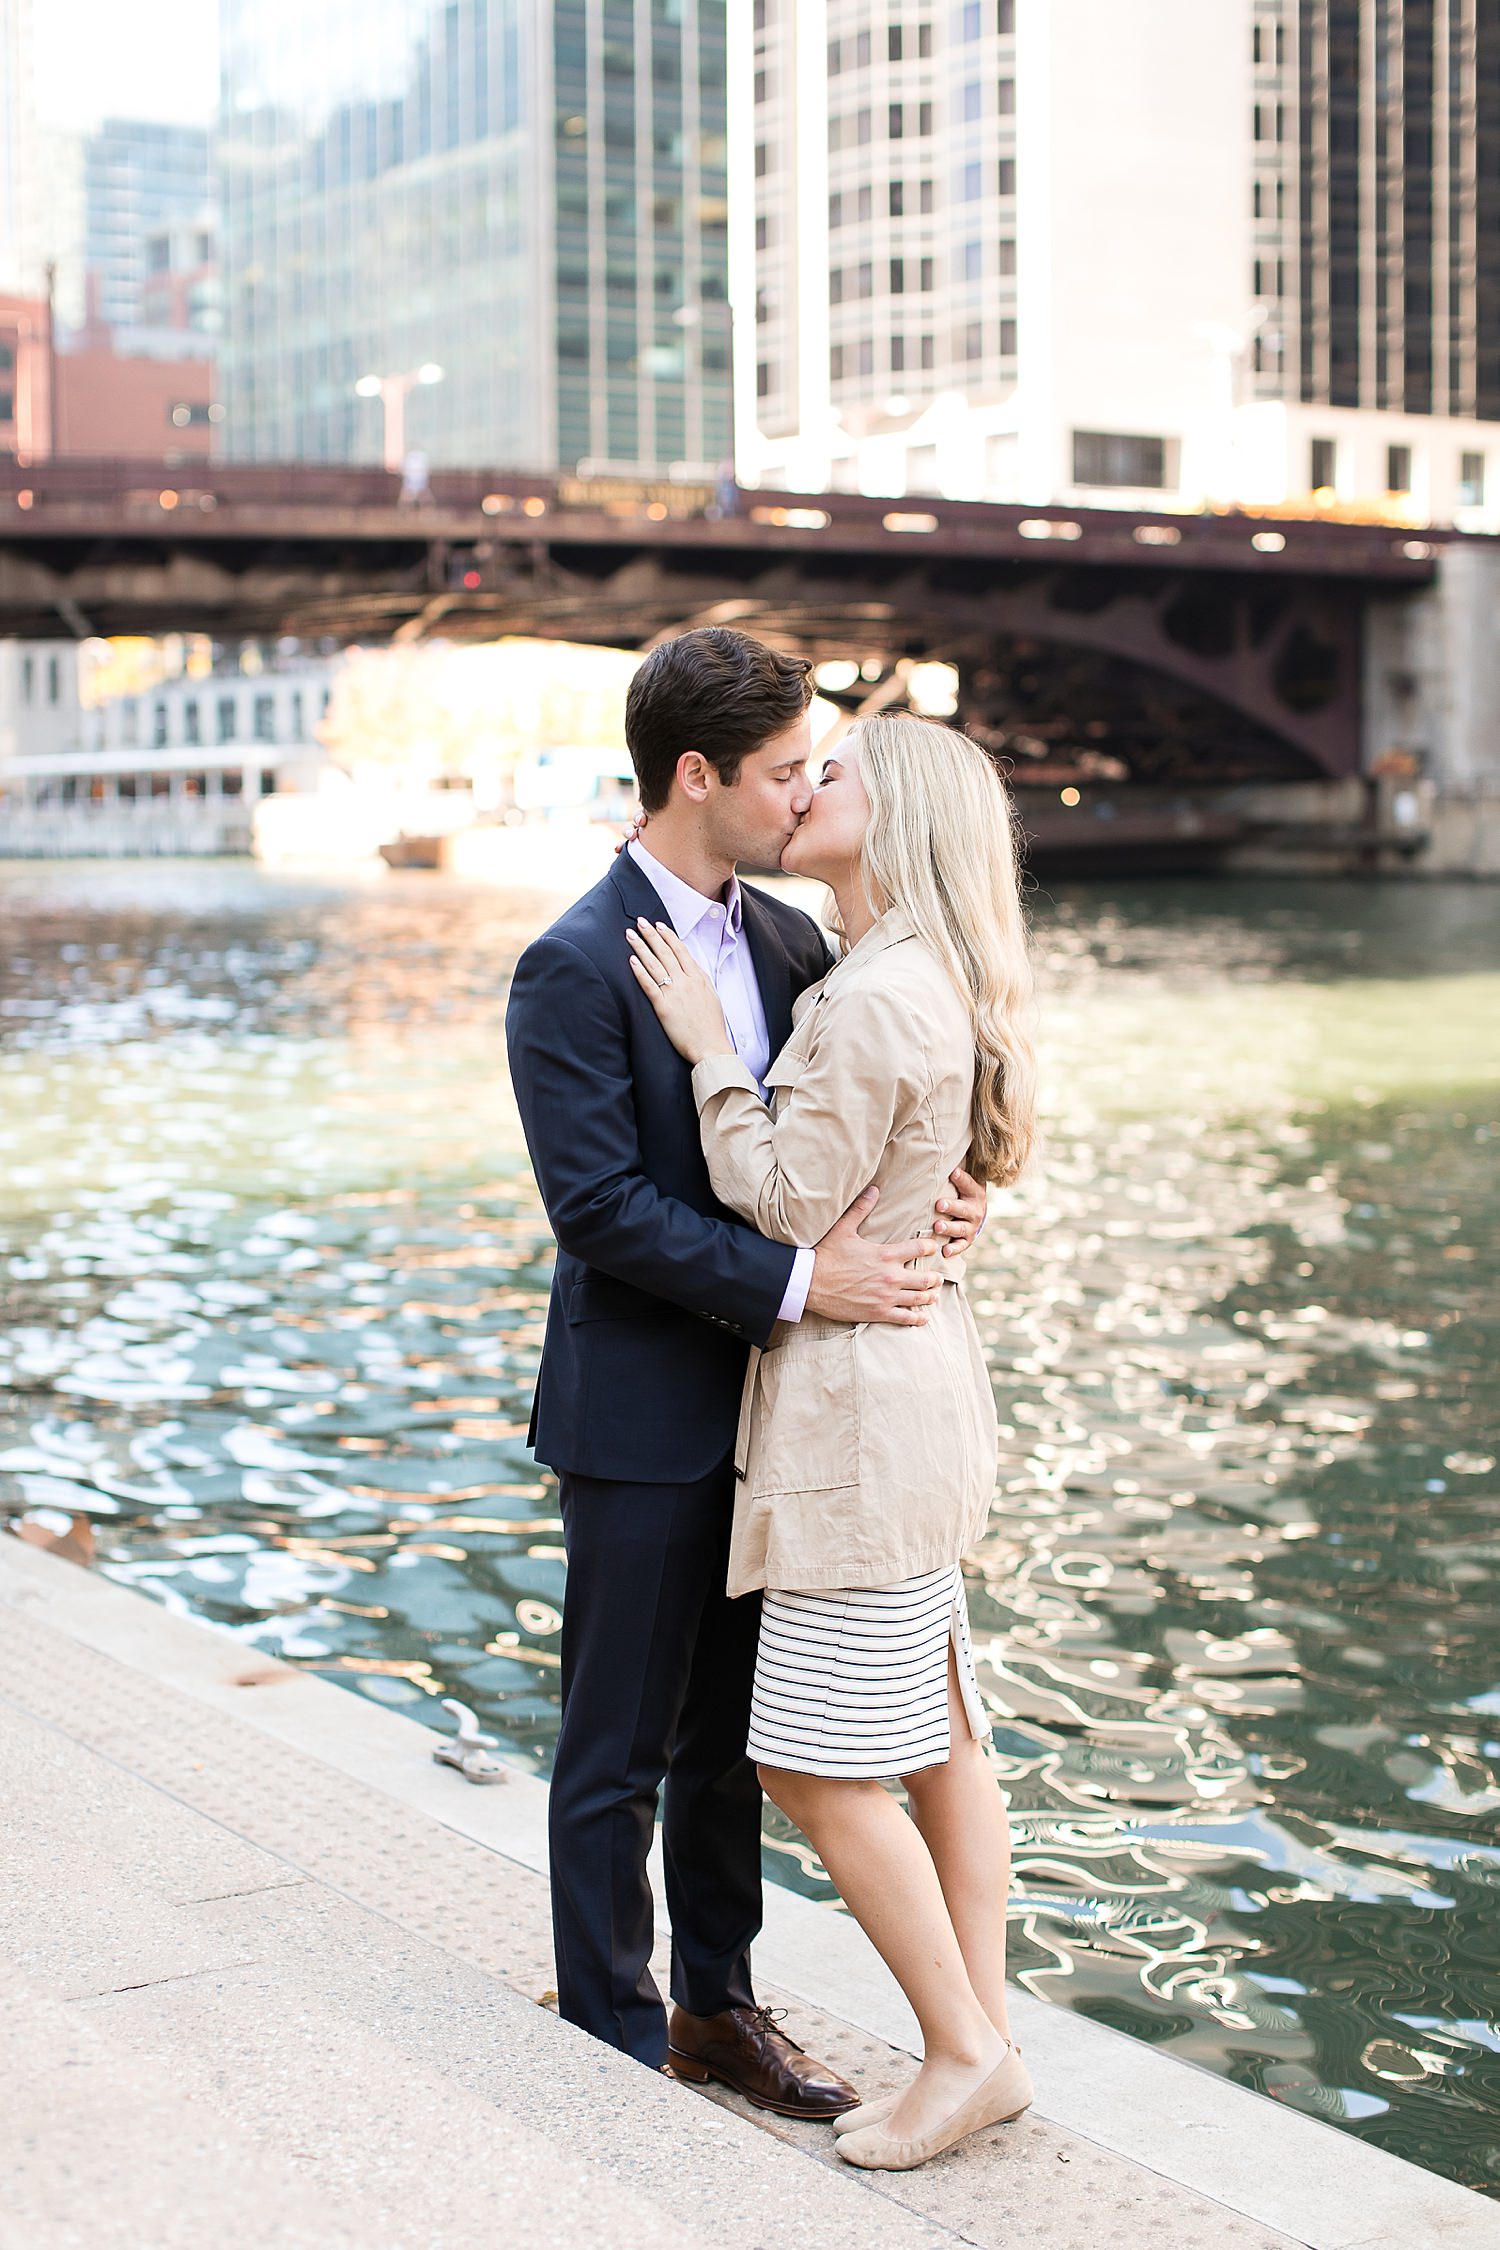 Couple kisses by the riverwalk in Chicago.